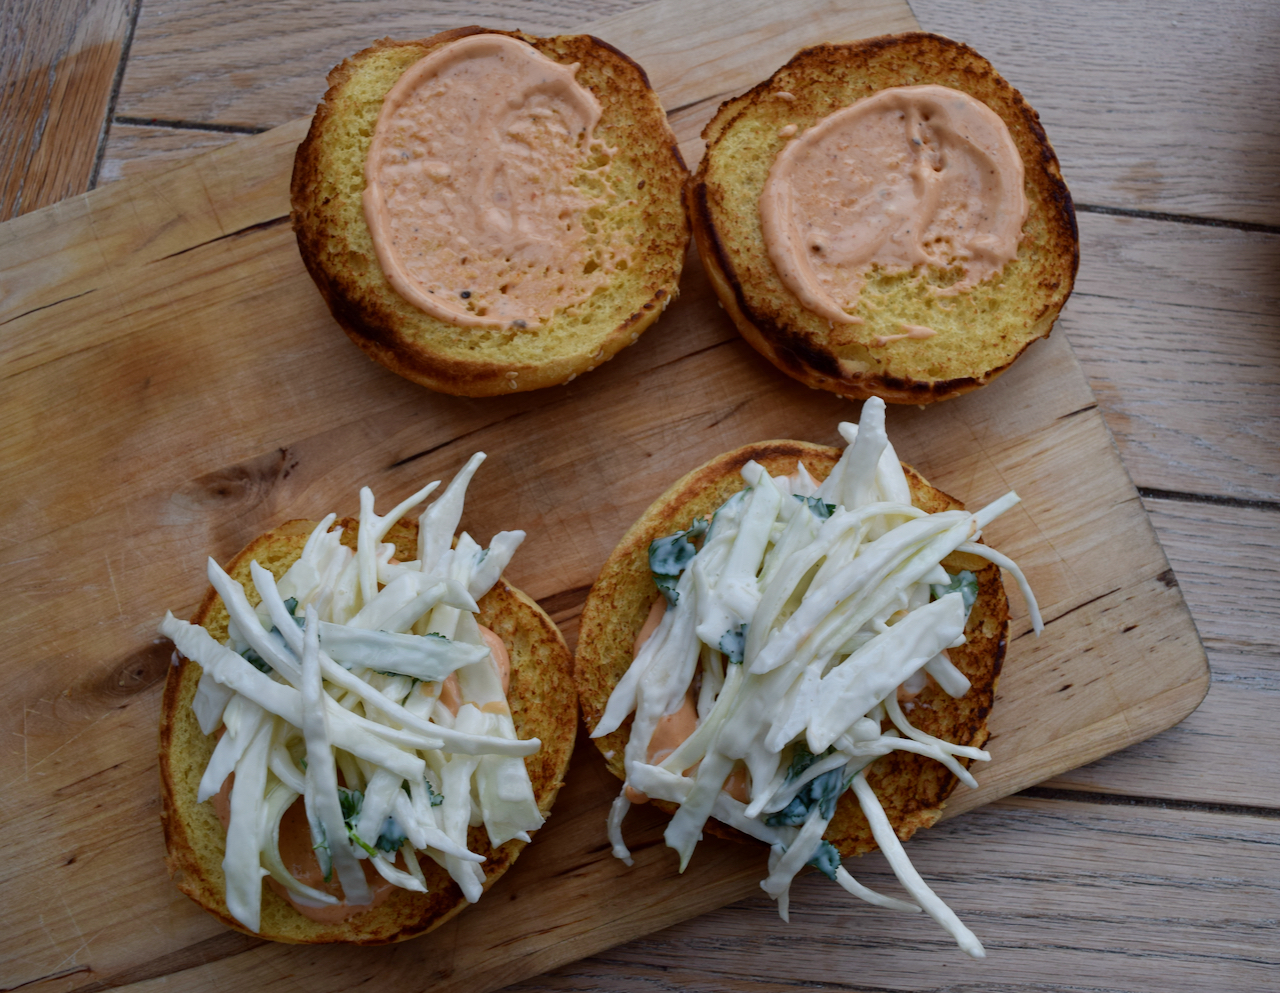 Prawn Burgers with Cabbage Slaw recipe from Lucy Loves Food Blog